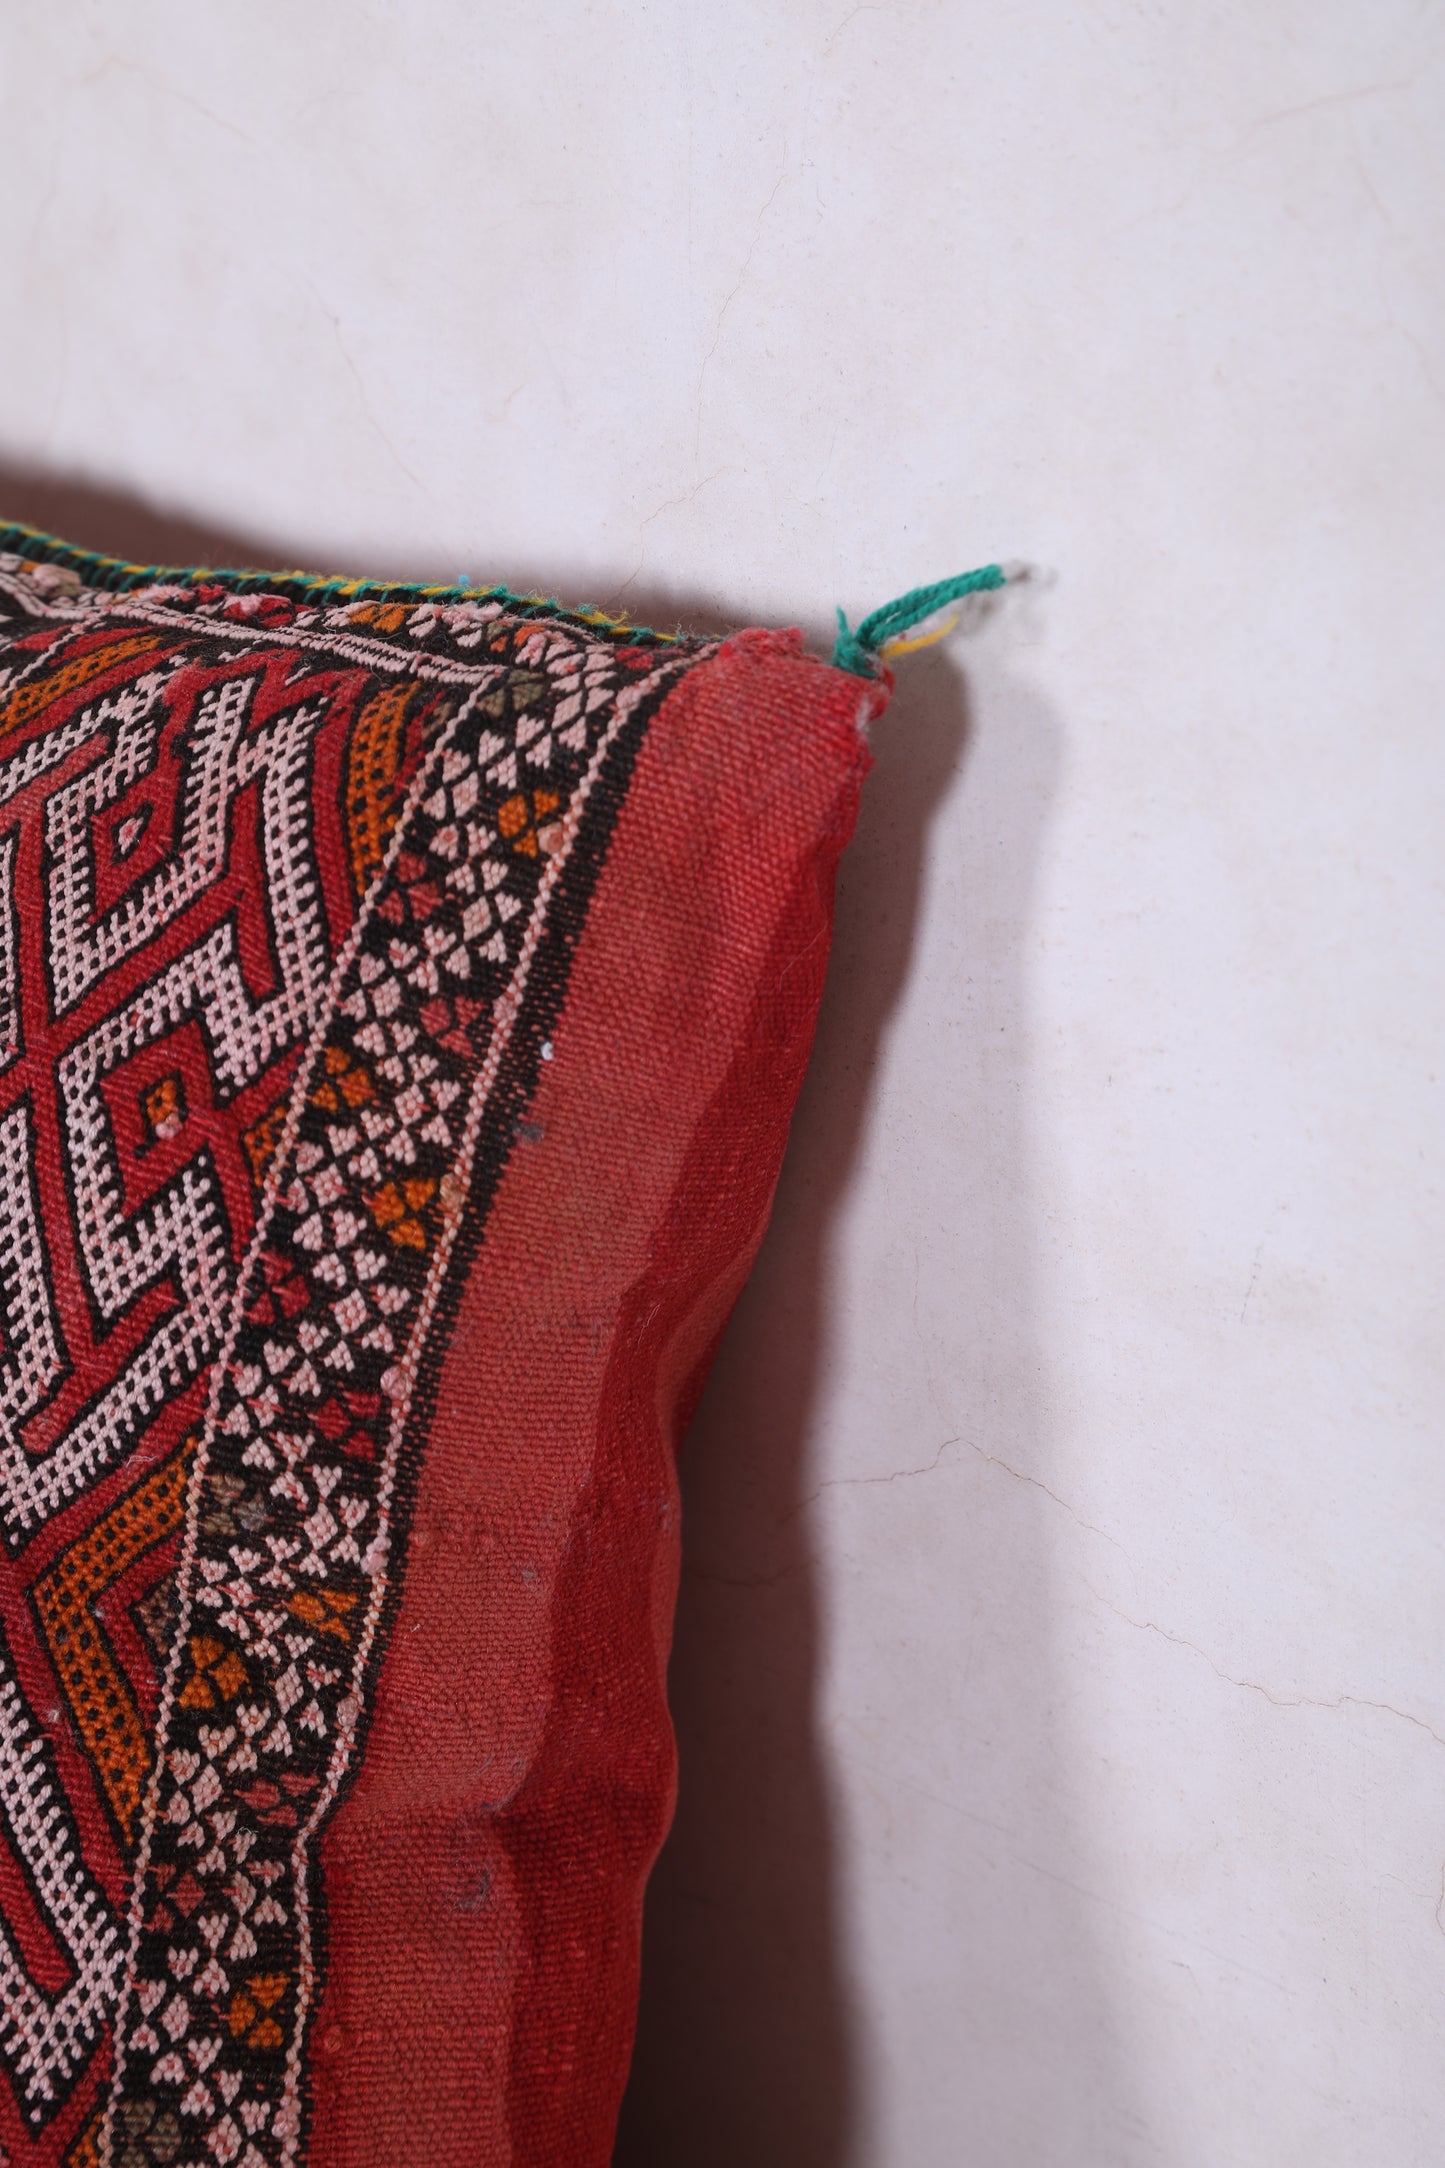 Moroccan pillow 15.3 INCHES X 20.8 INCHES